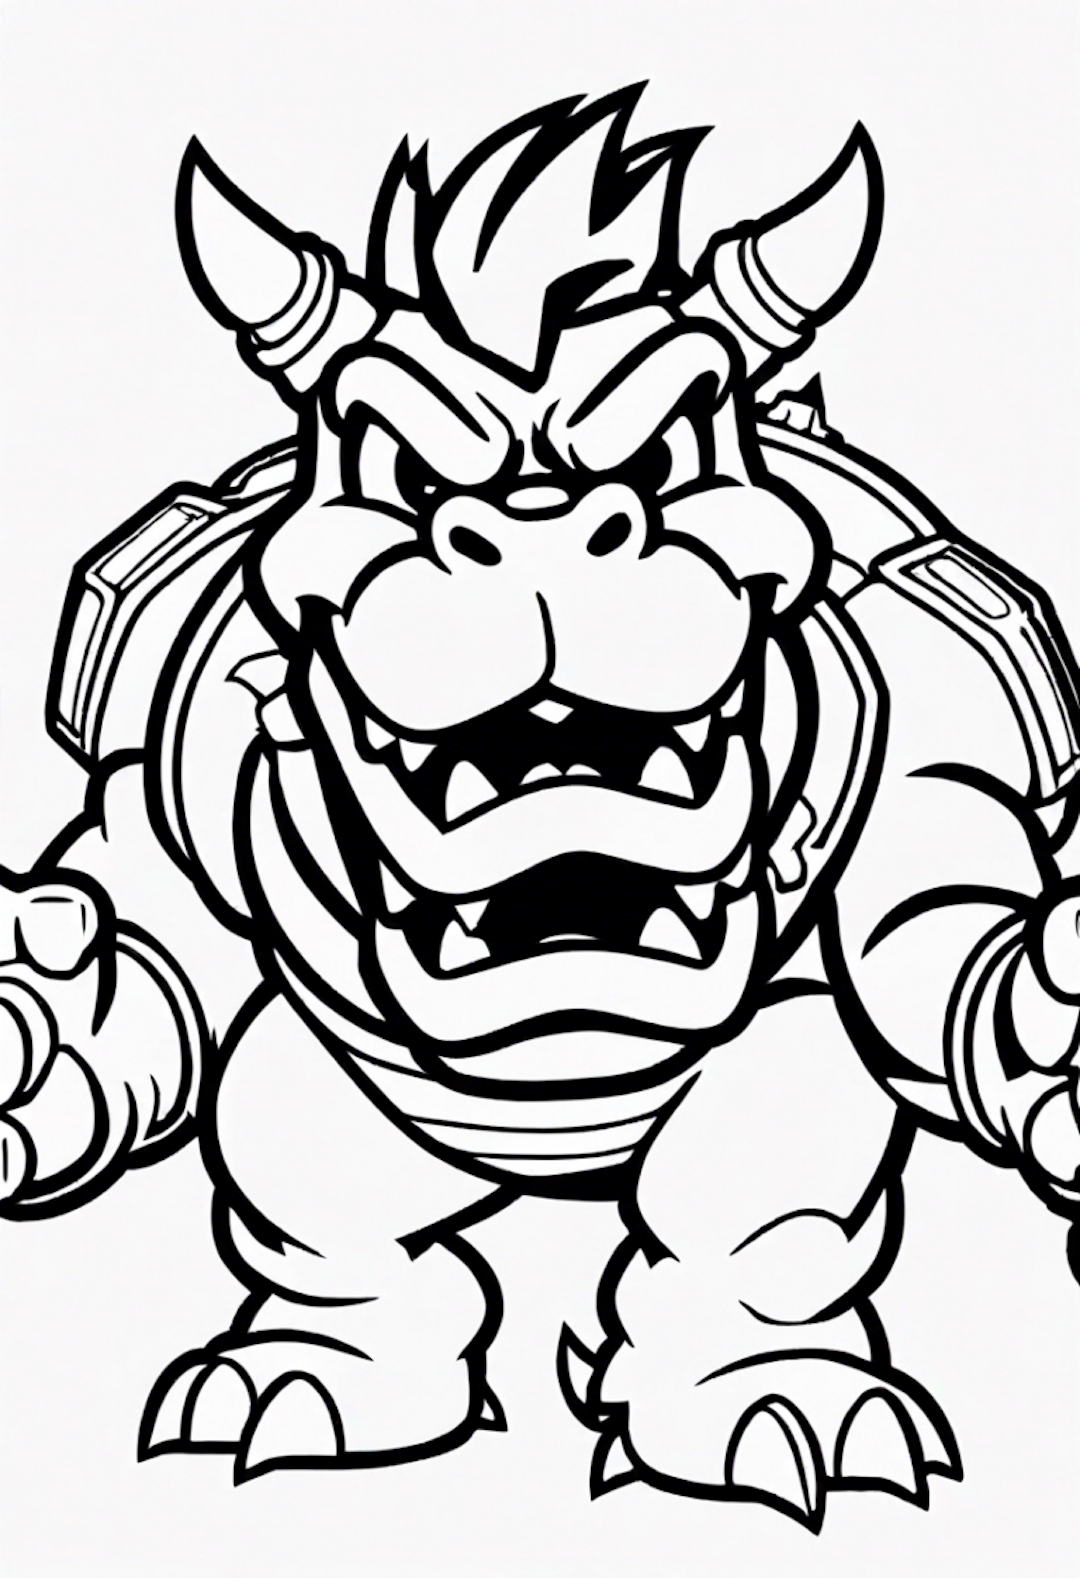 Bowser’s Fiery Roar Coloring Page coloring pages